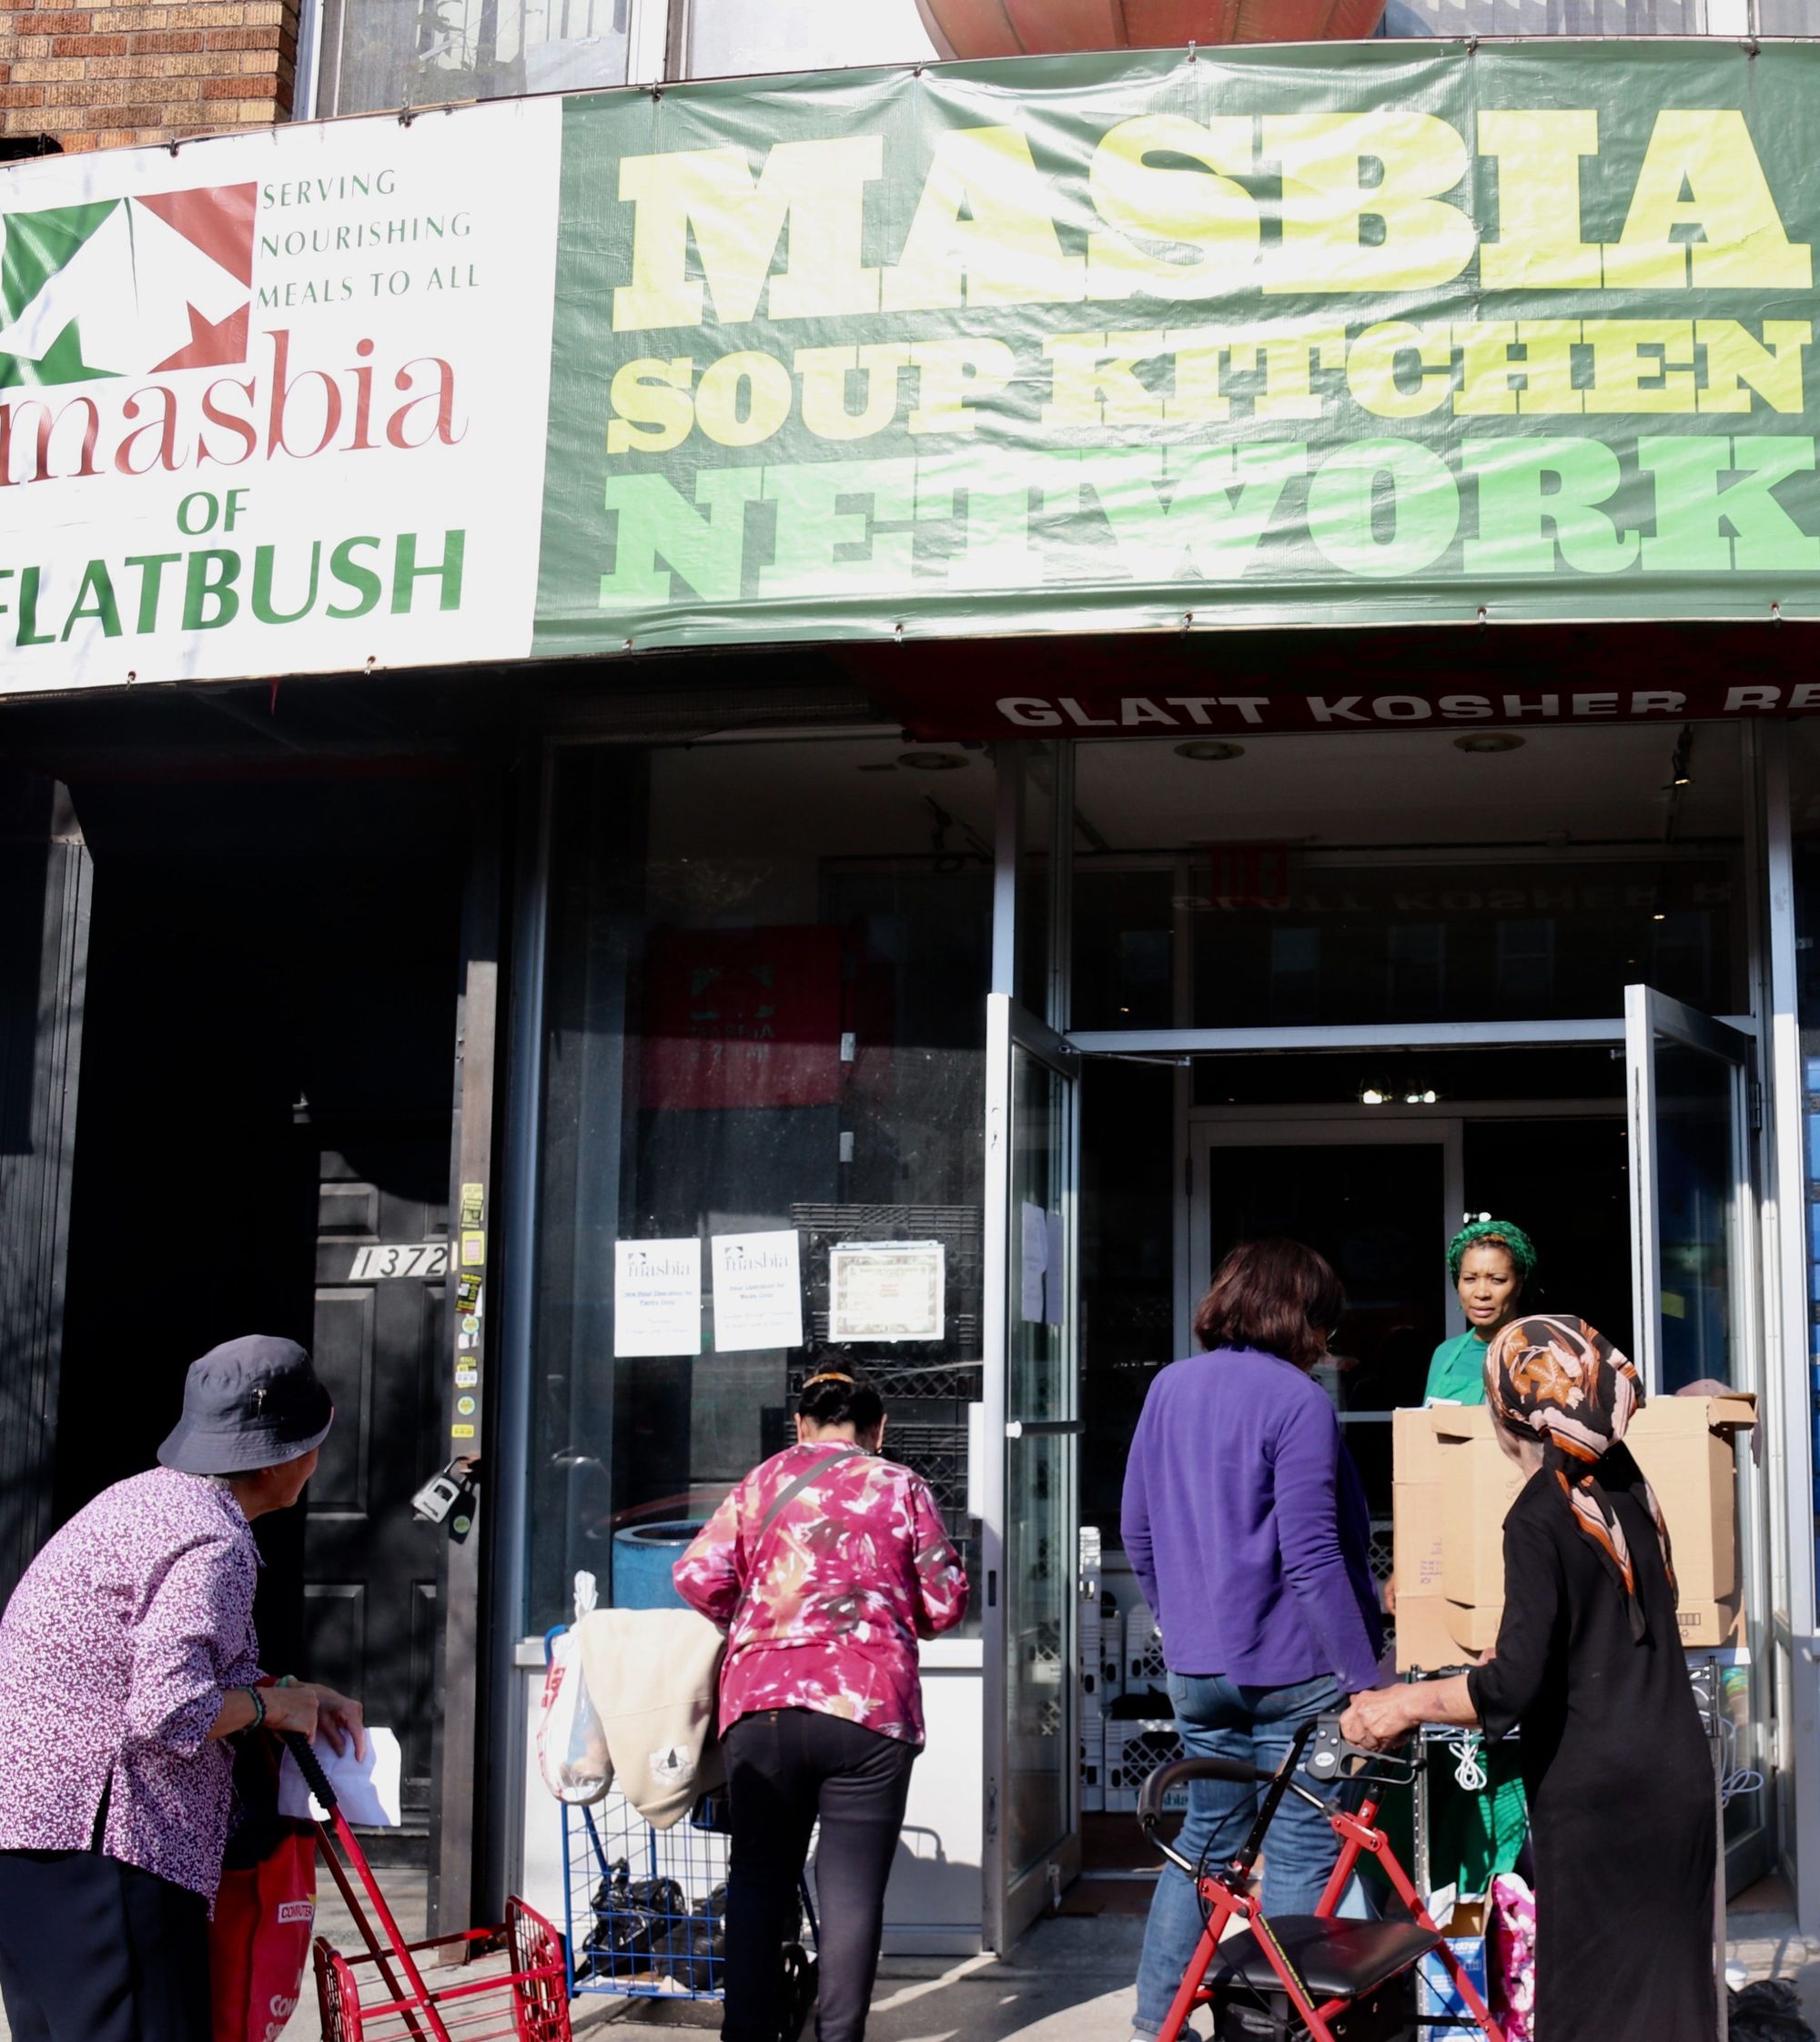 Serving Food, Fighting Hunger, Restoring Dignity – Masbia